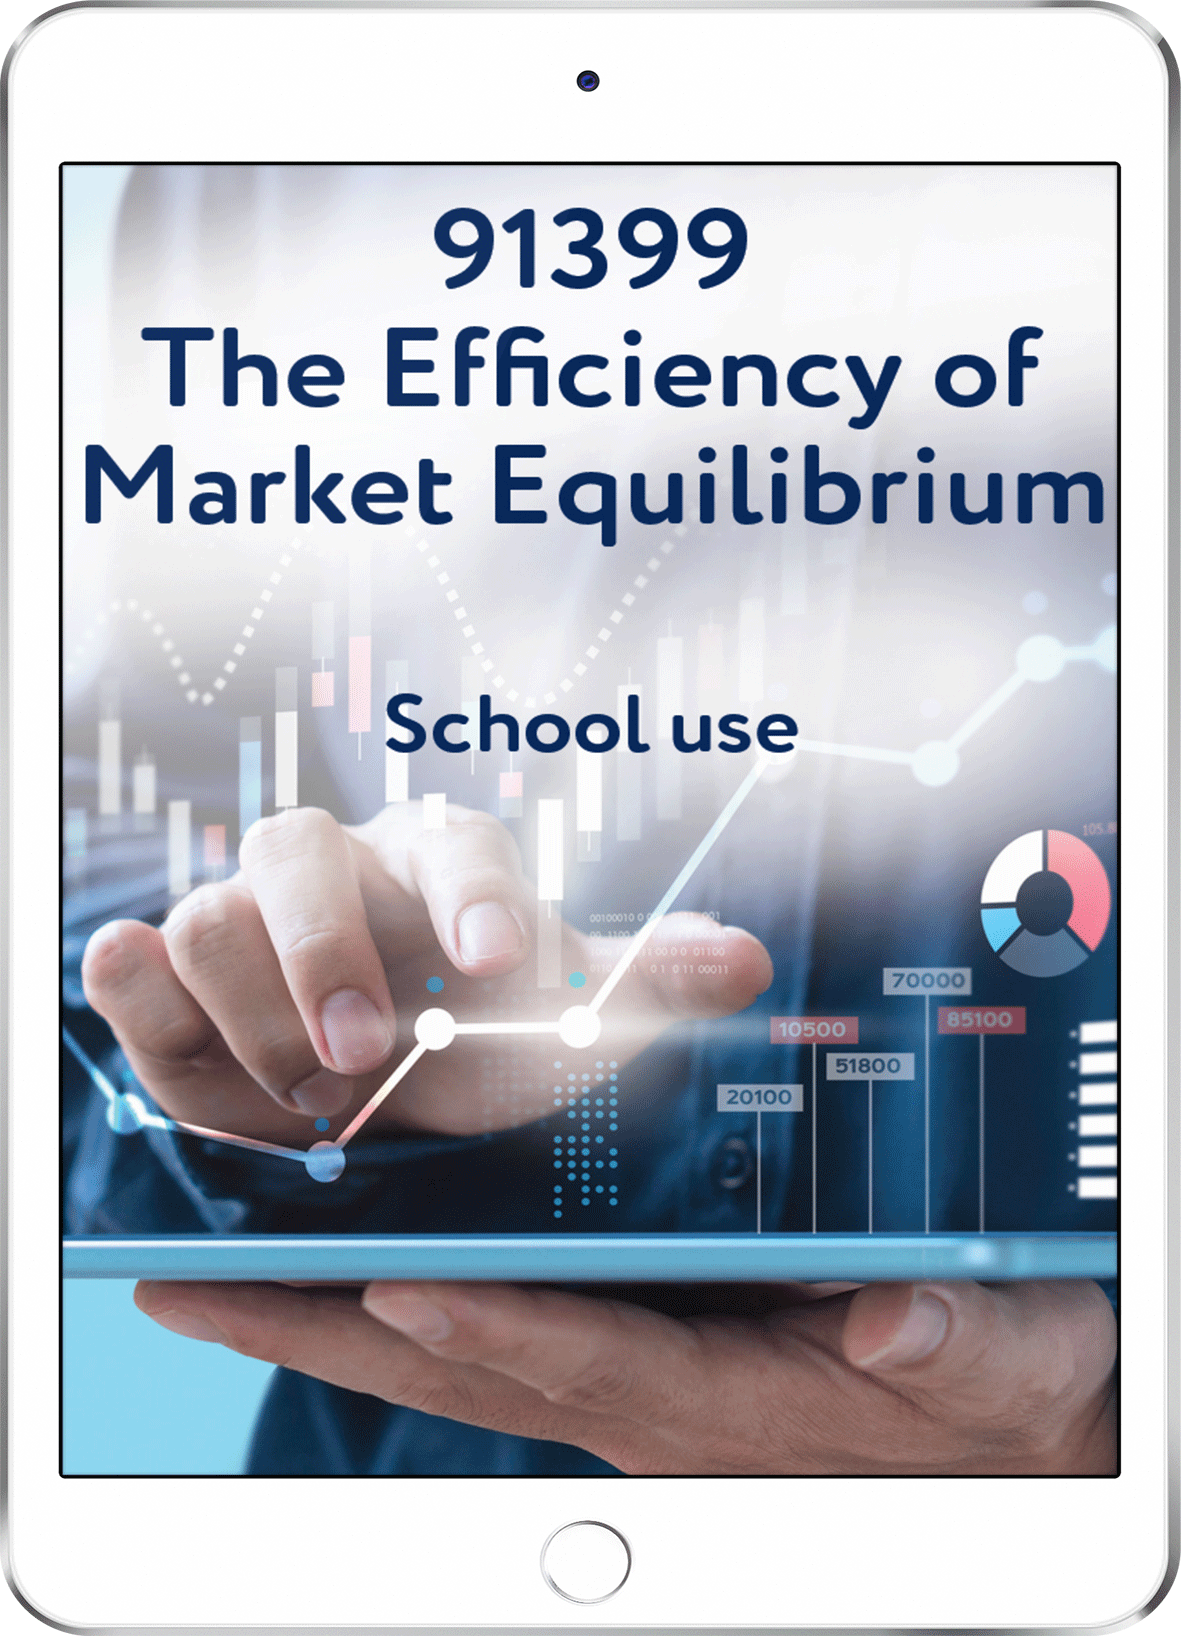 91399 The Efficiency of Market Equilibrium - School Use